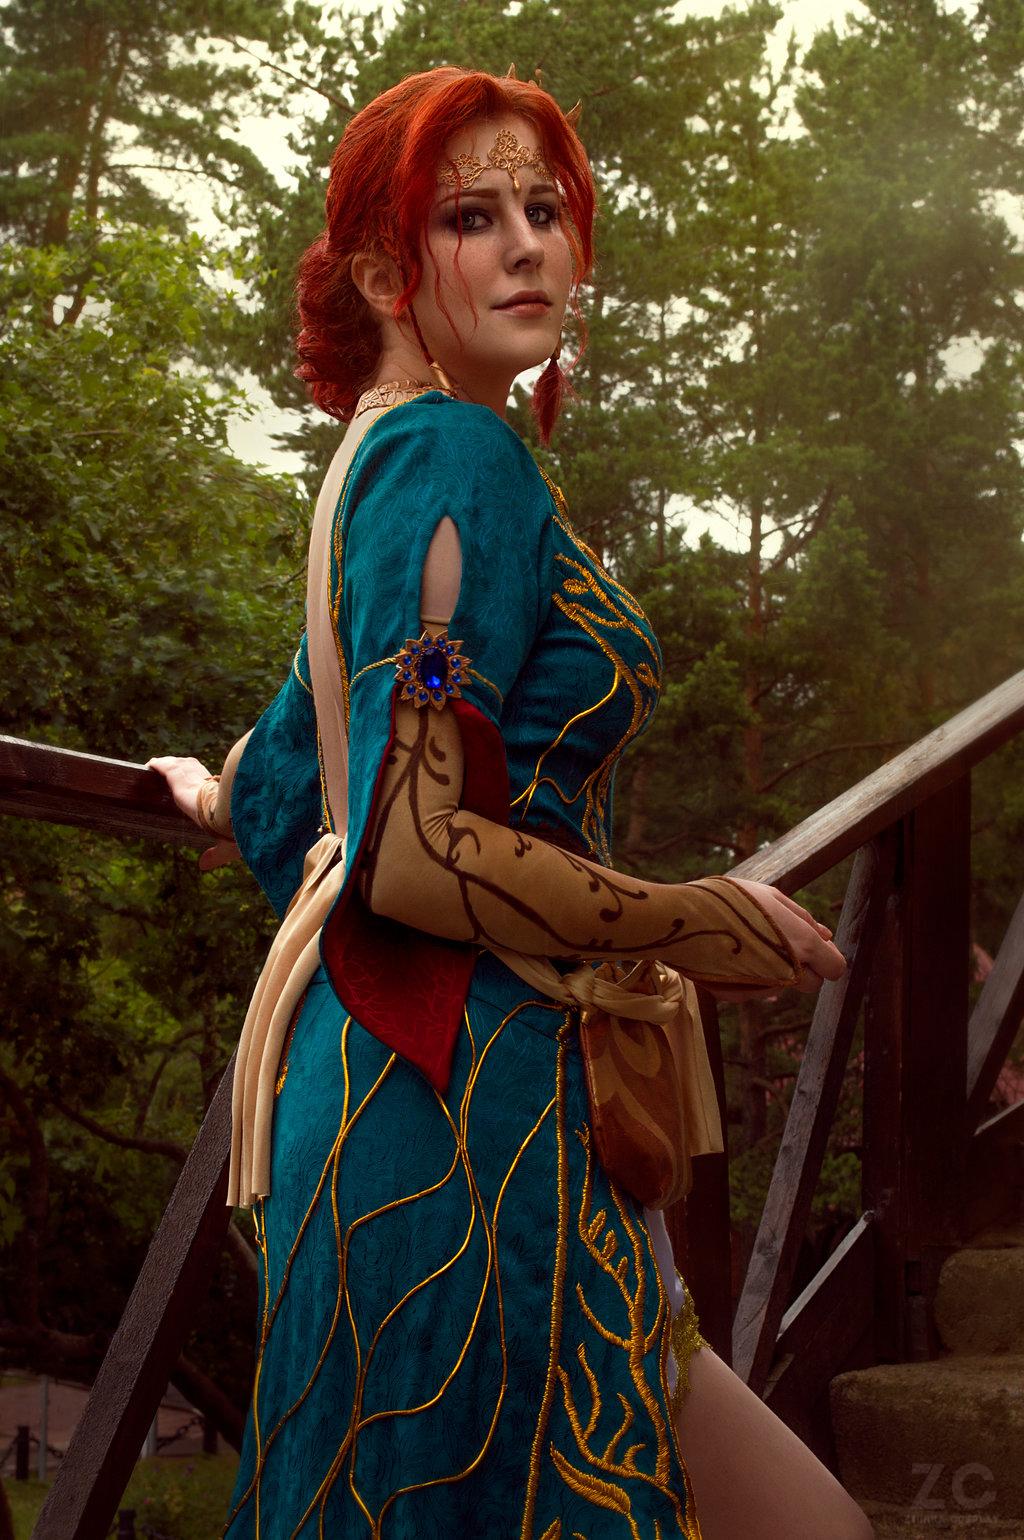 60+ Hot Pictures Of Triss Merigold From The Witcher Series Are Delight For Fans 5